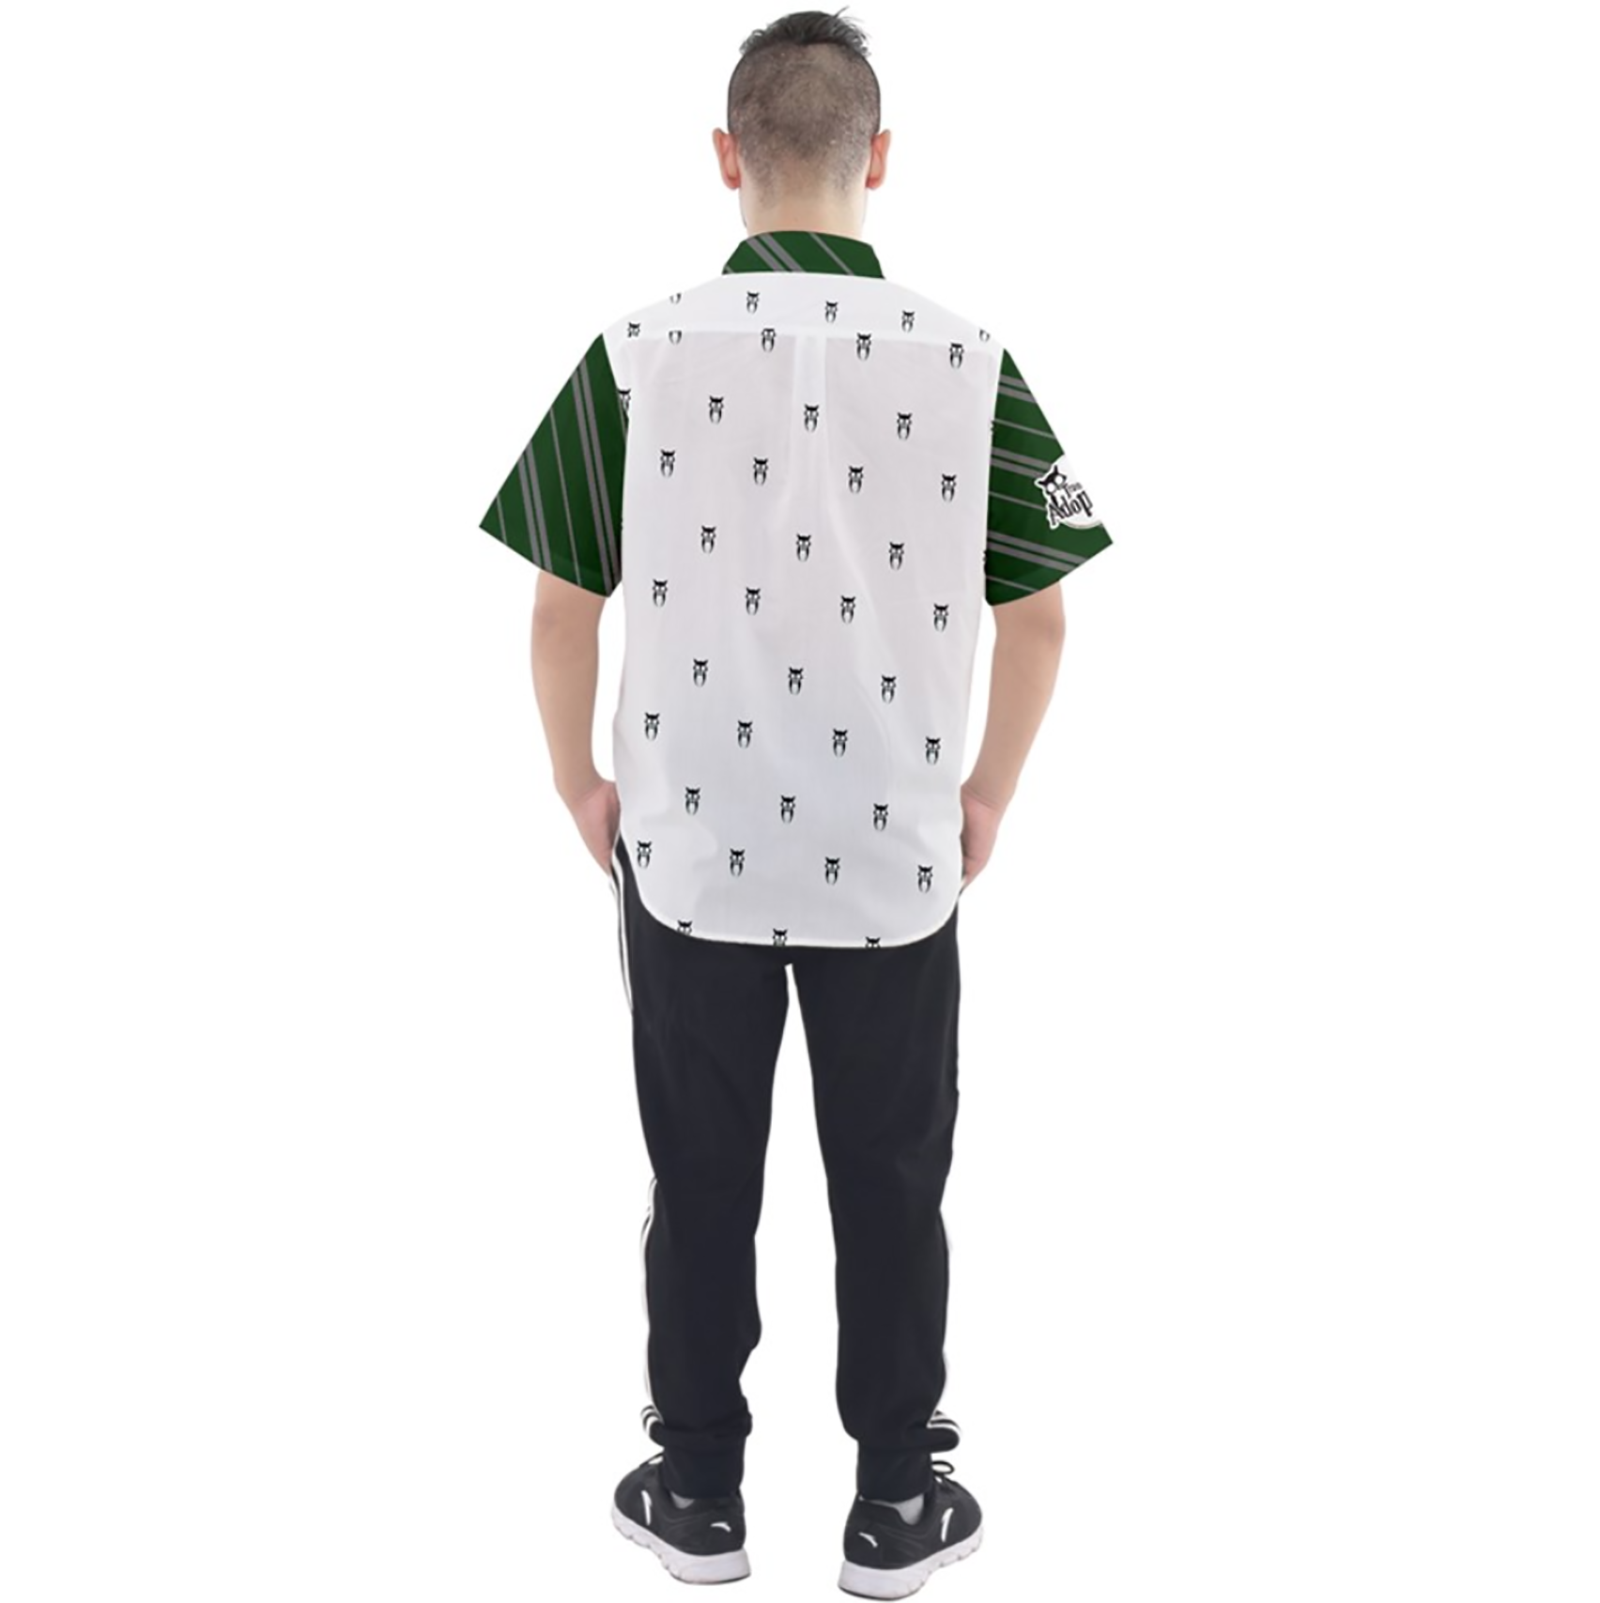 Green & Gray Owl Patterned Button Up Short Sleeve Shirt - Inspired by Slytherin House